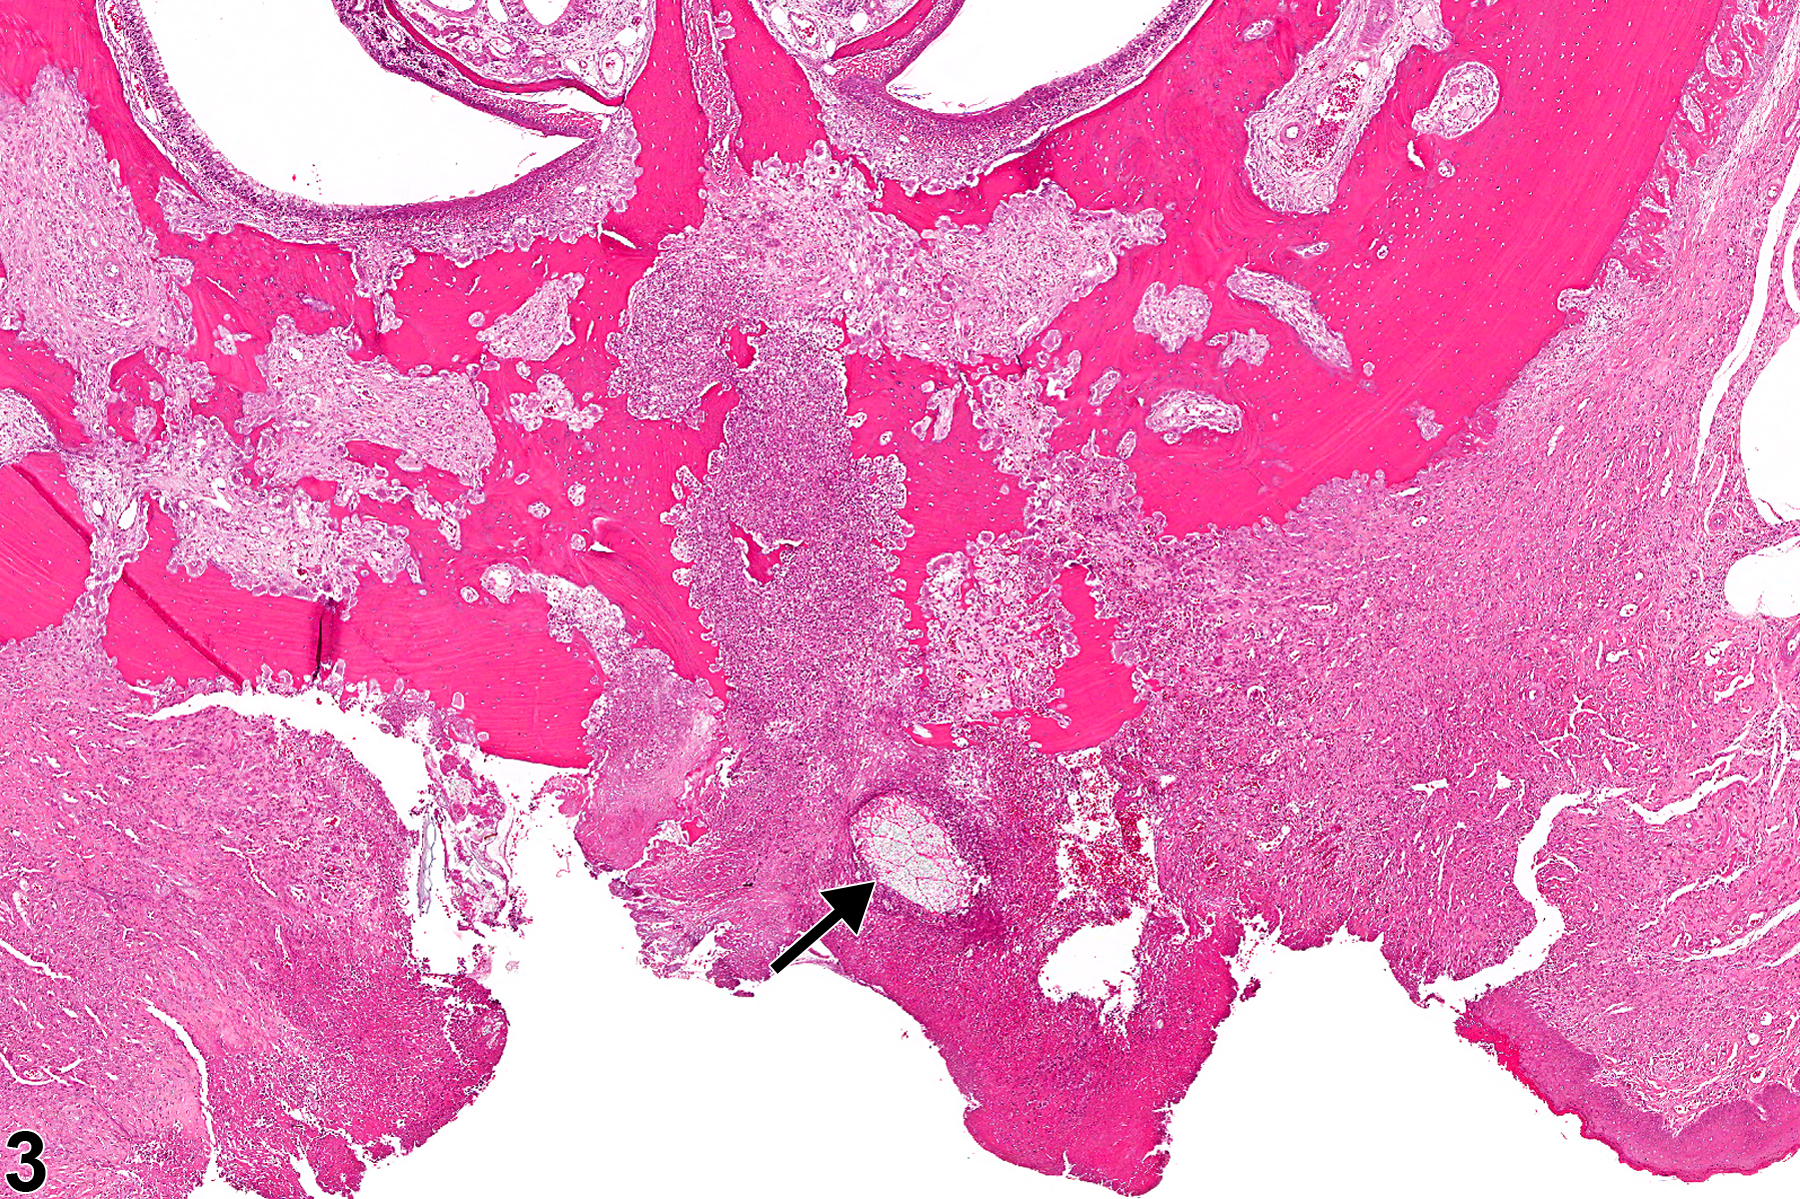 Image of foreign body in the oral mucosa from a male F344/N rat in a chronic study